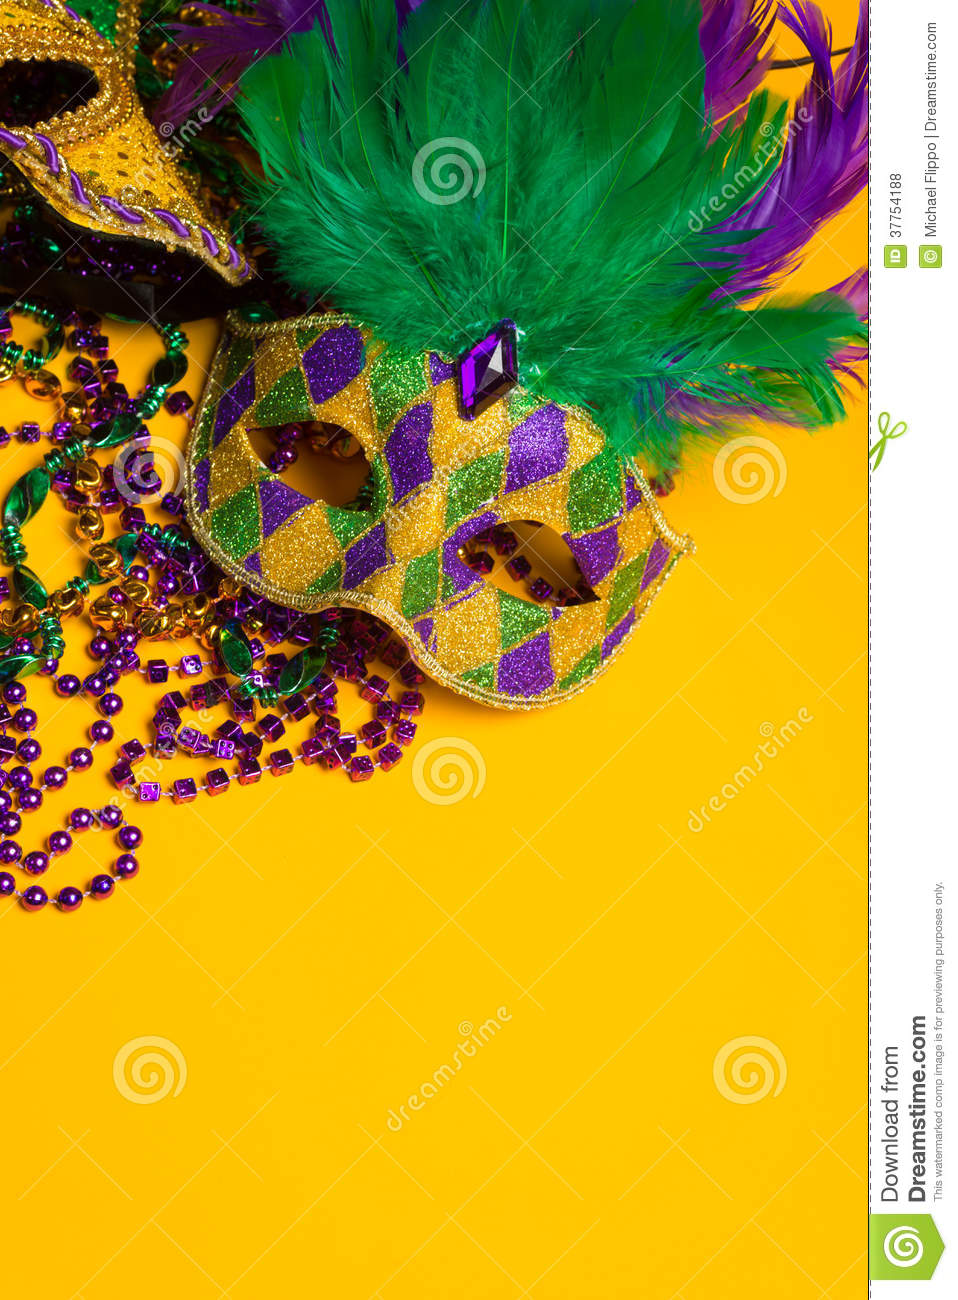 Festive Colorful Group Of Mardi Gras Or Carnivale Masks On A Yellow    